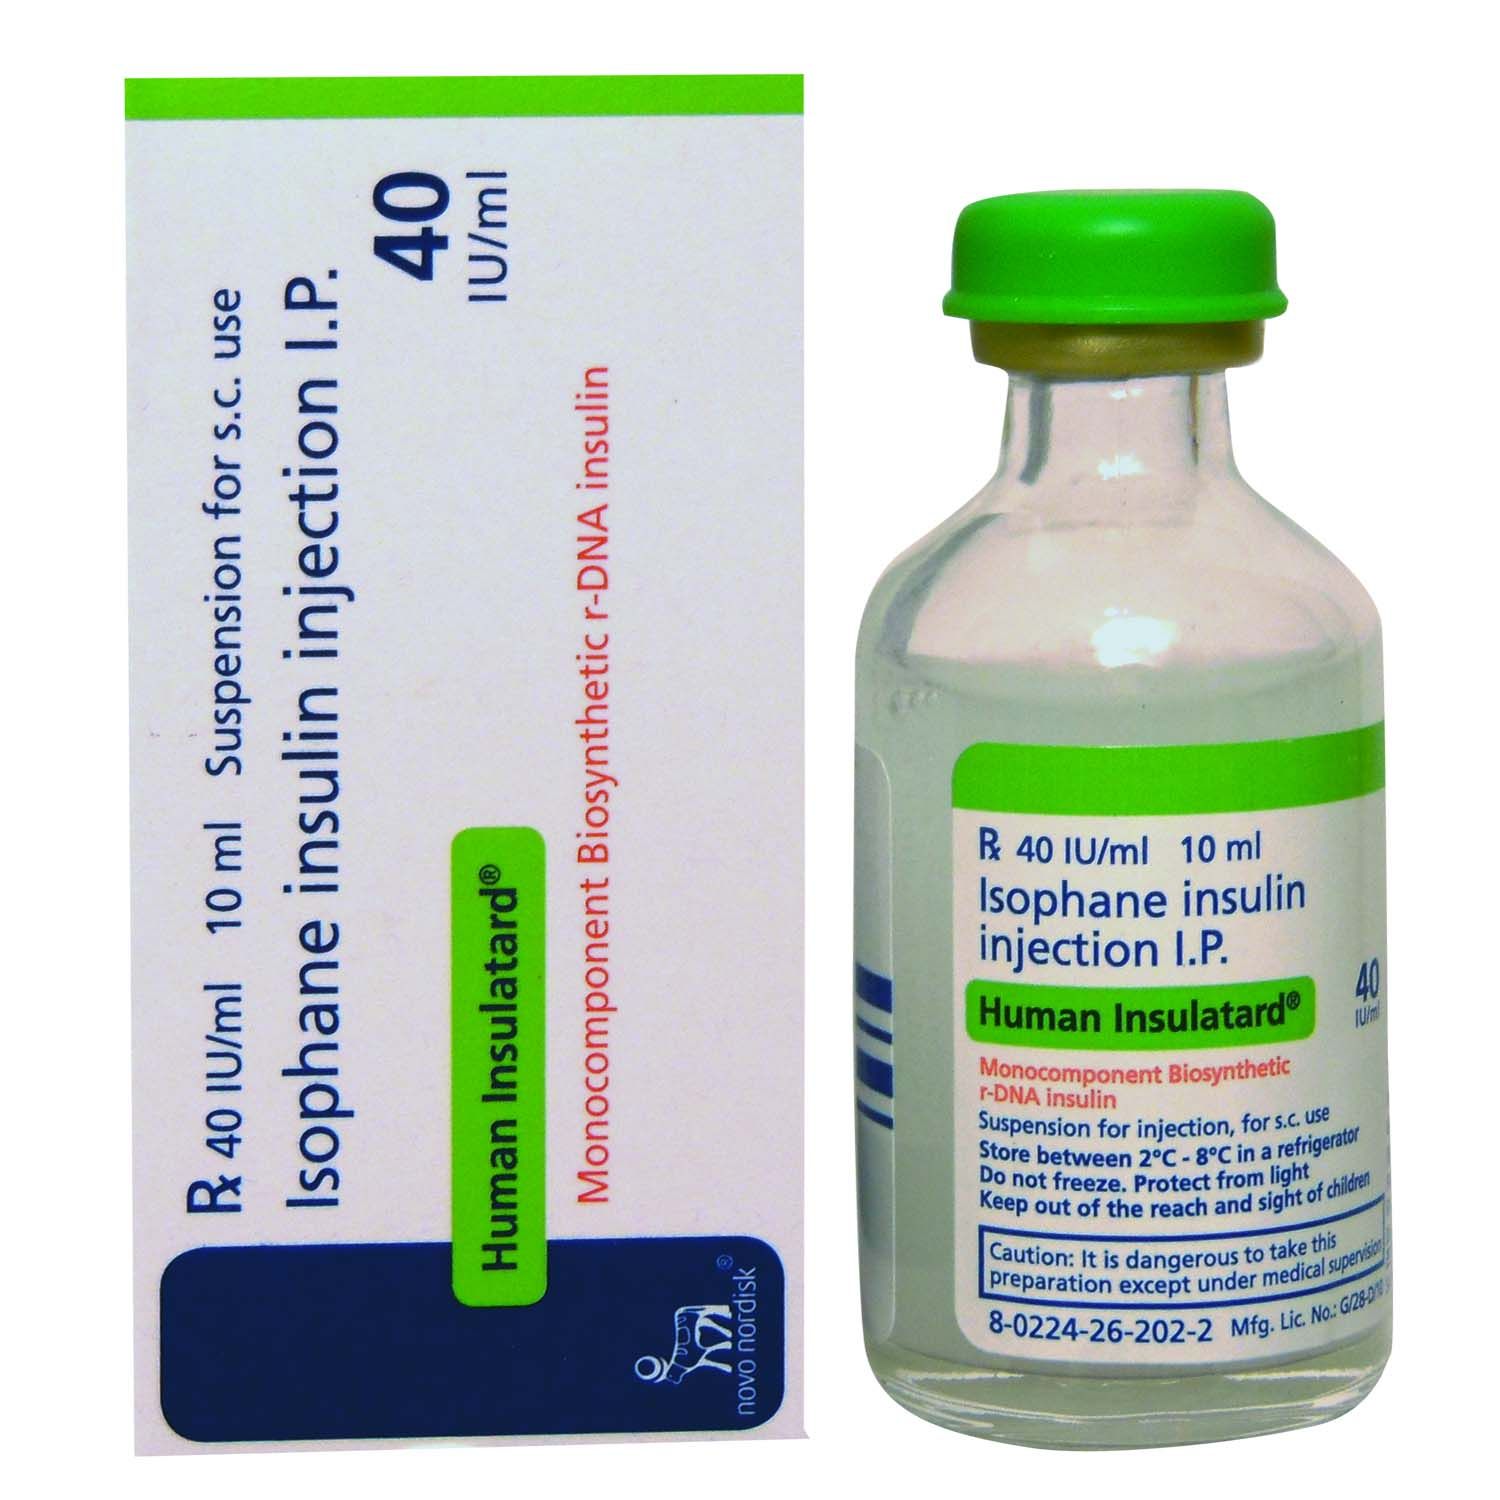 Buy Human Insulatard 40IU/ml Suspension for Injection 10 ml Online